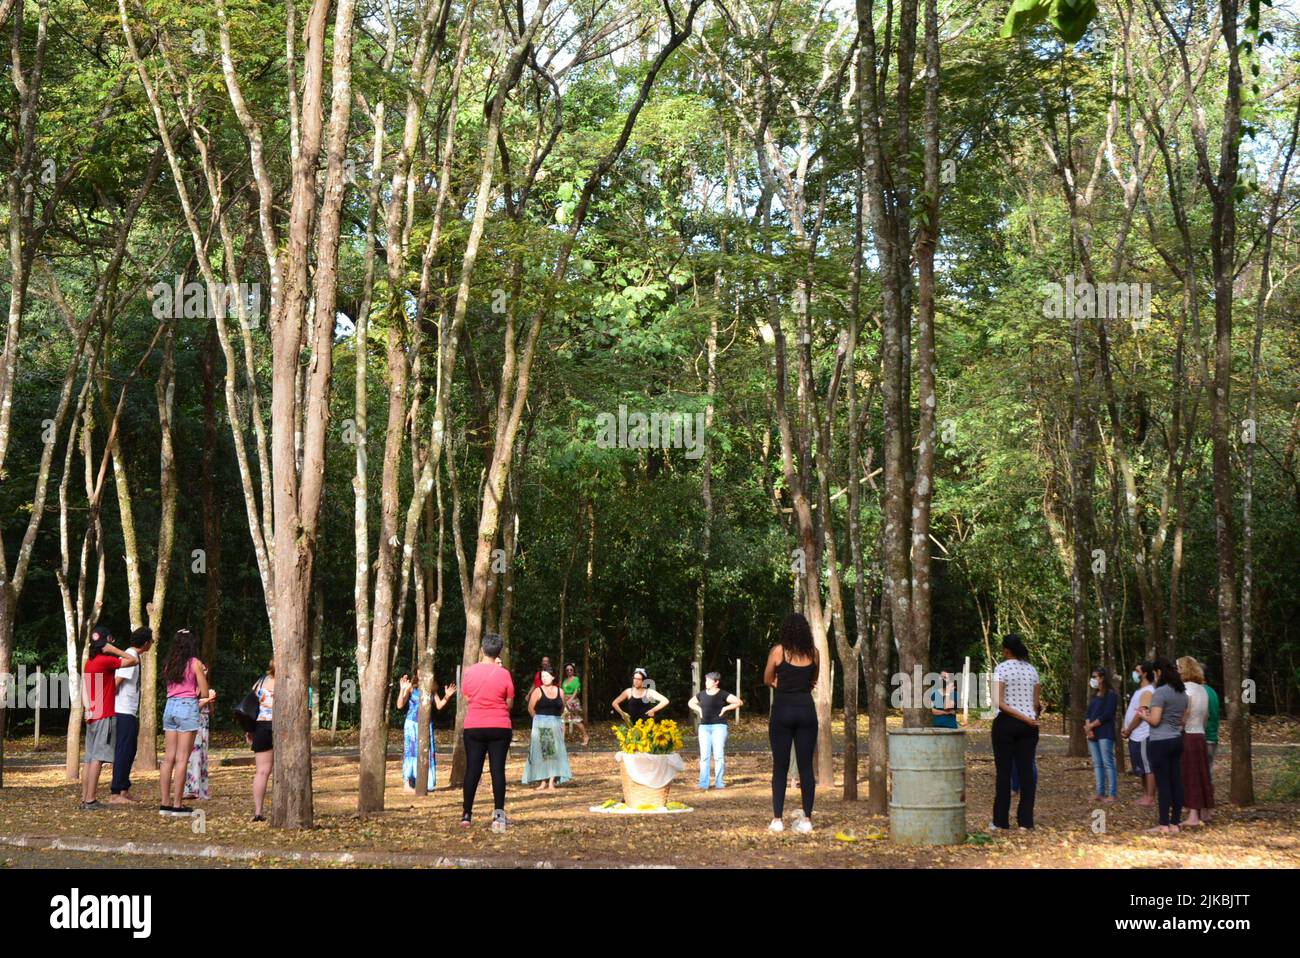 Marília, São Paulo, Brazil, - July 17, 2022: People doing Yoga class in the city's public forest, panoramic photo Stock Photo